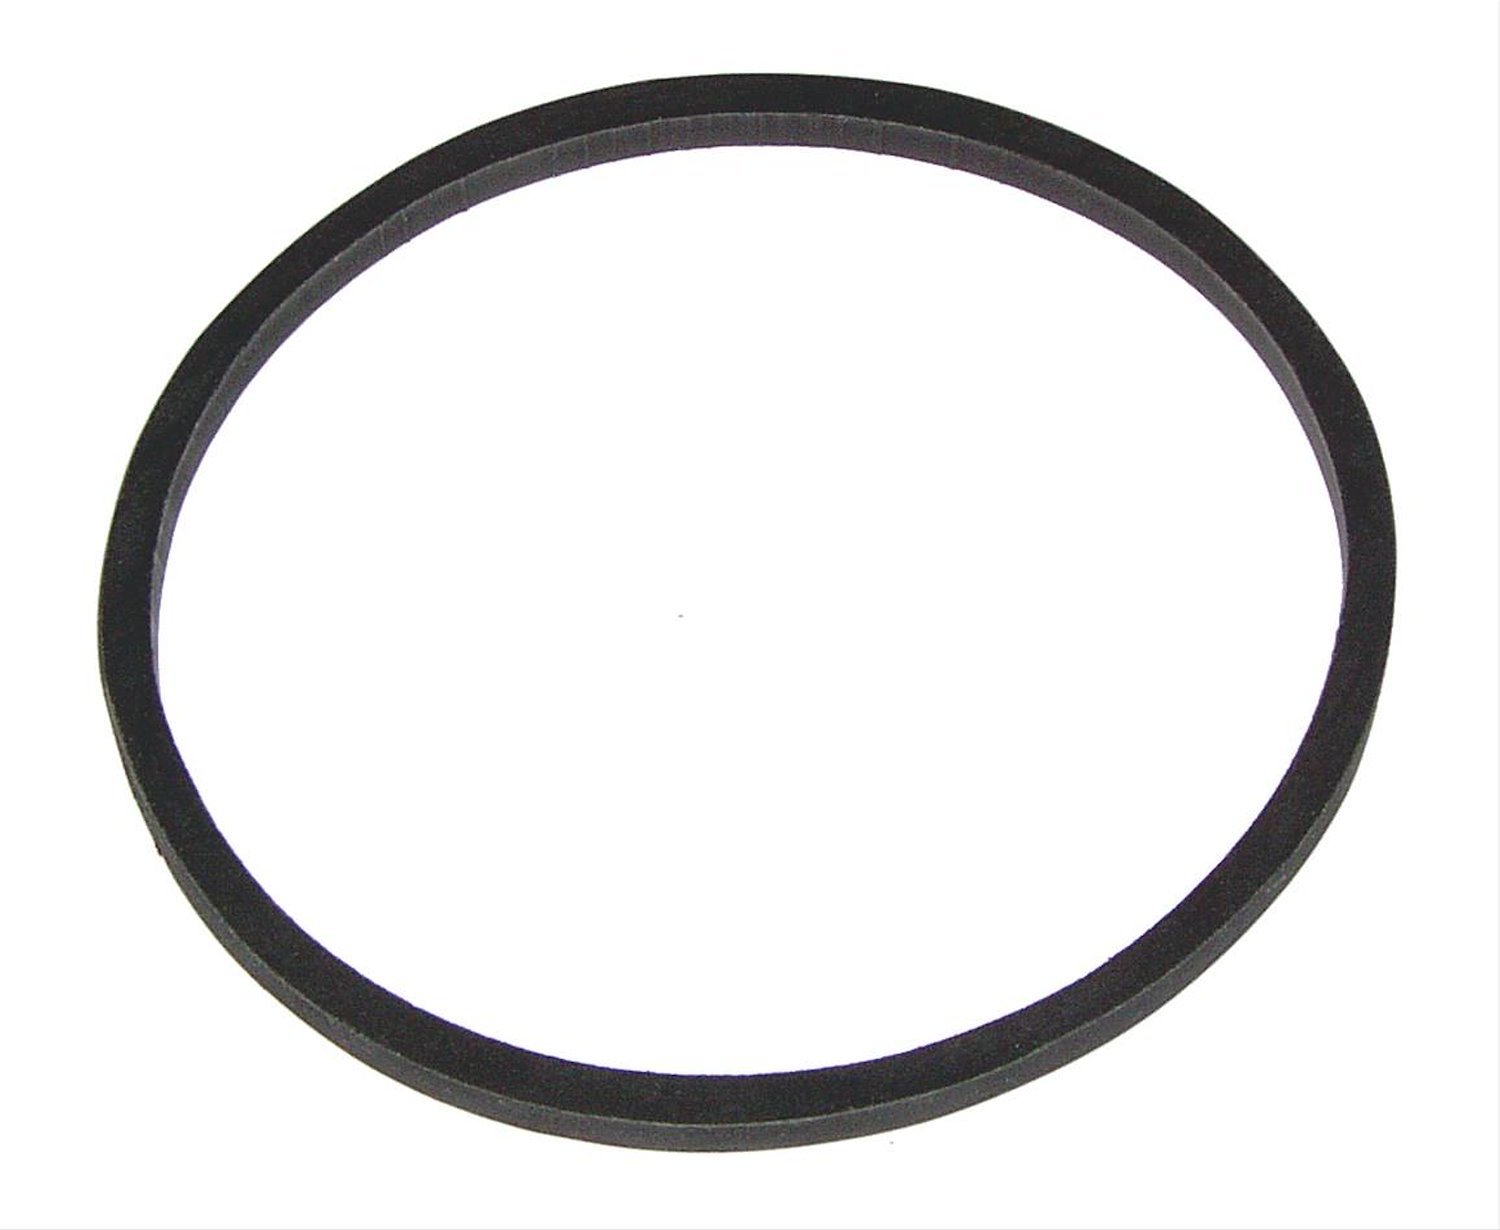 RAISED Plastic Fuel Cell Cap GASKET ONLY BLACK